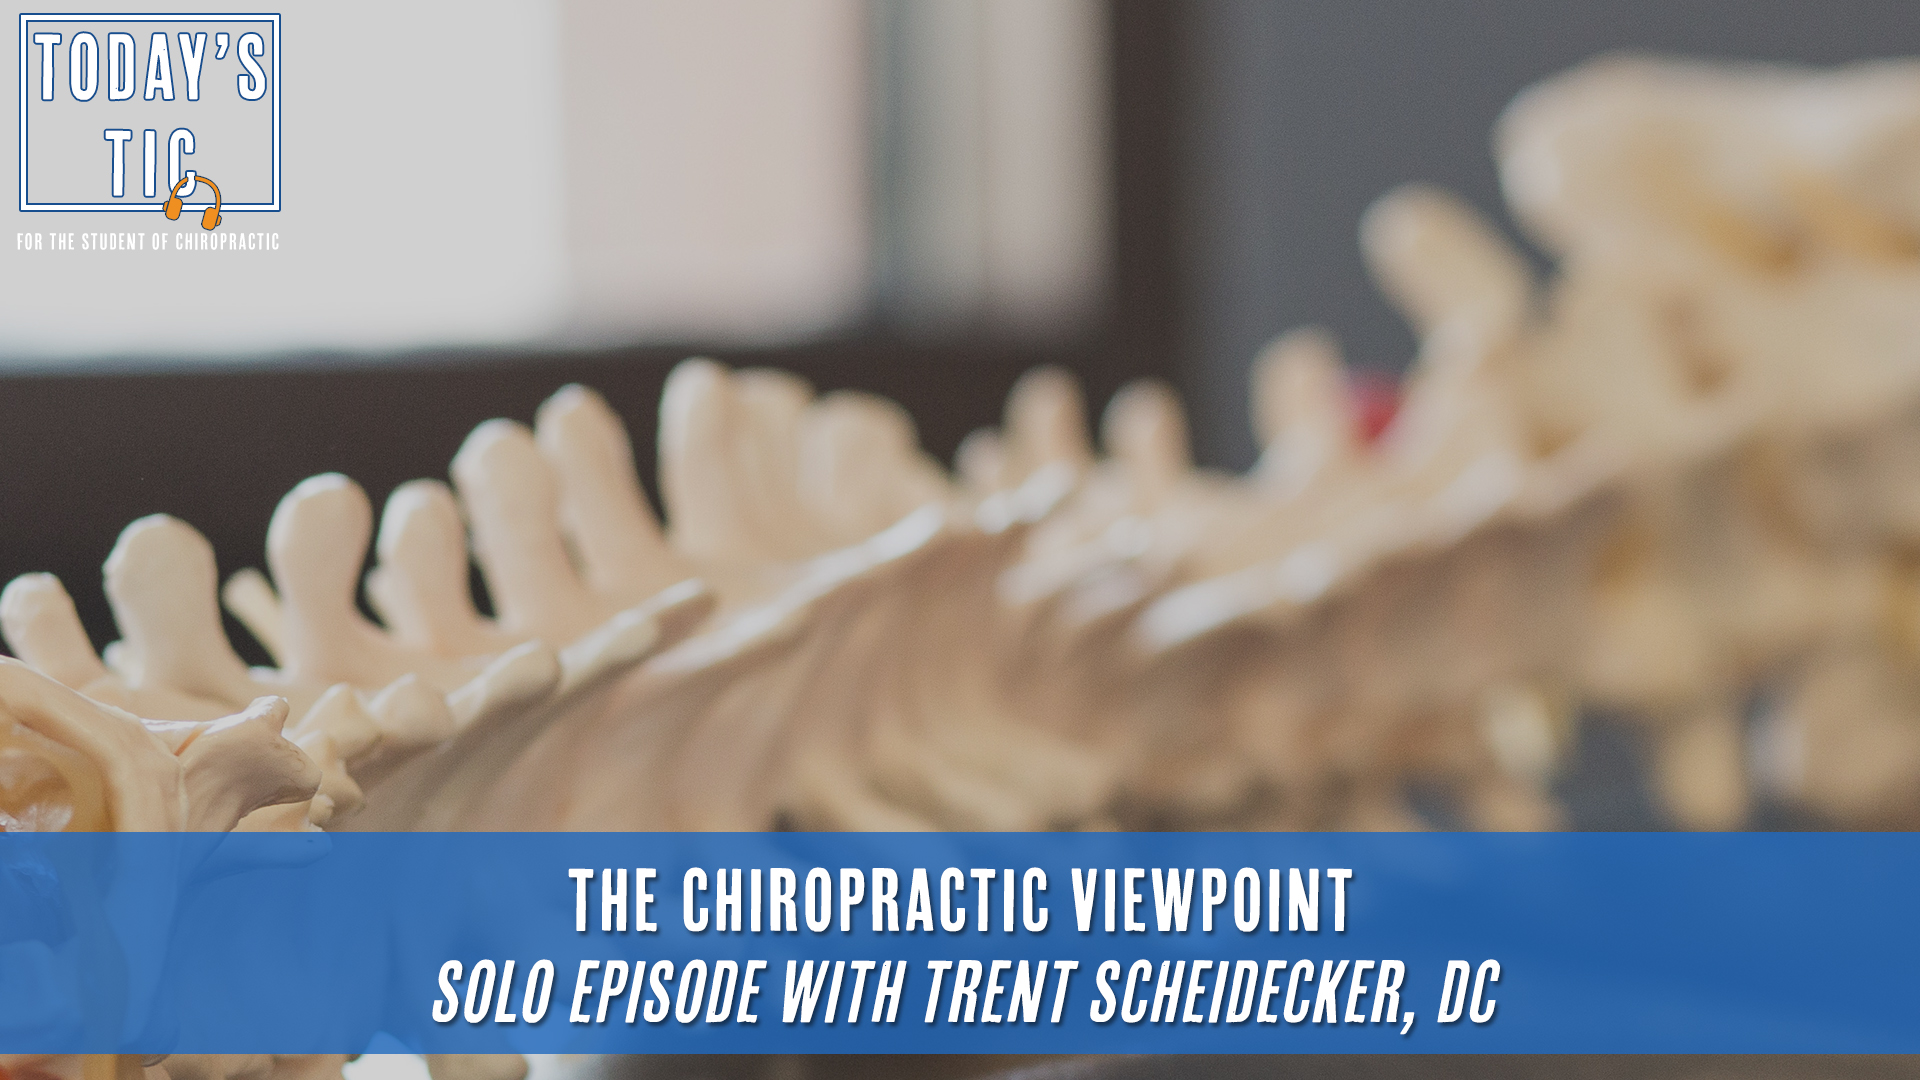 The Chiropractic Viewpoint